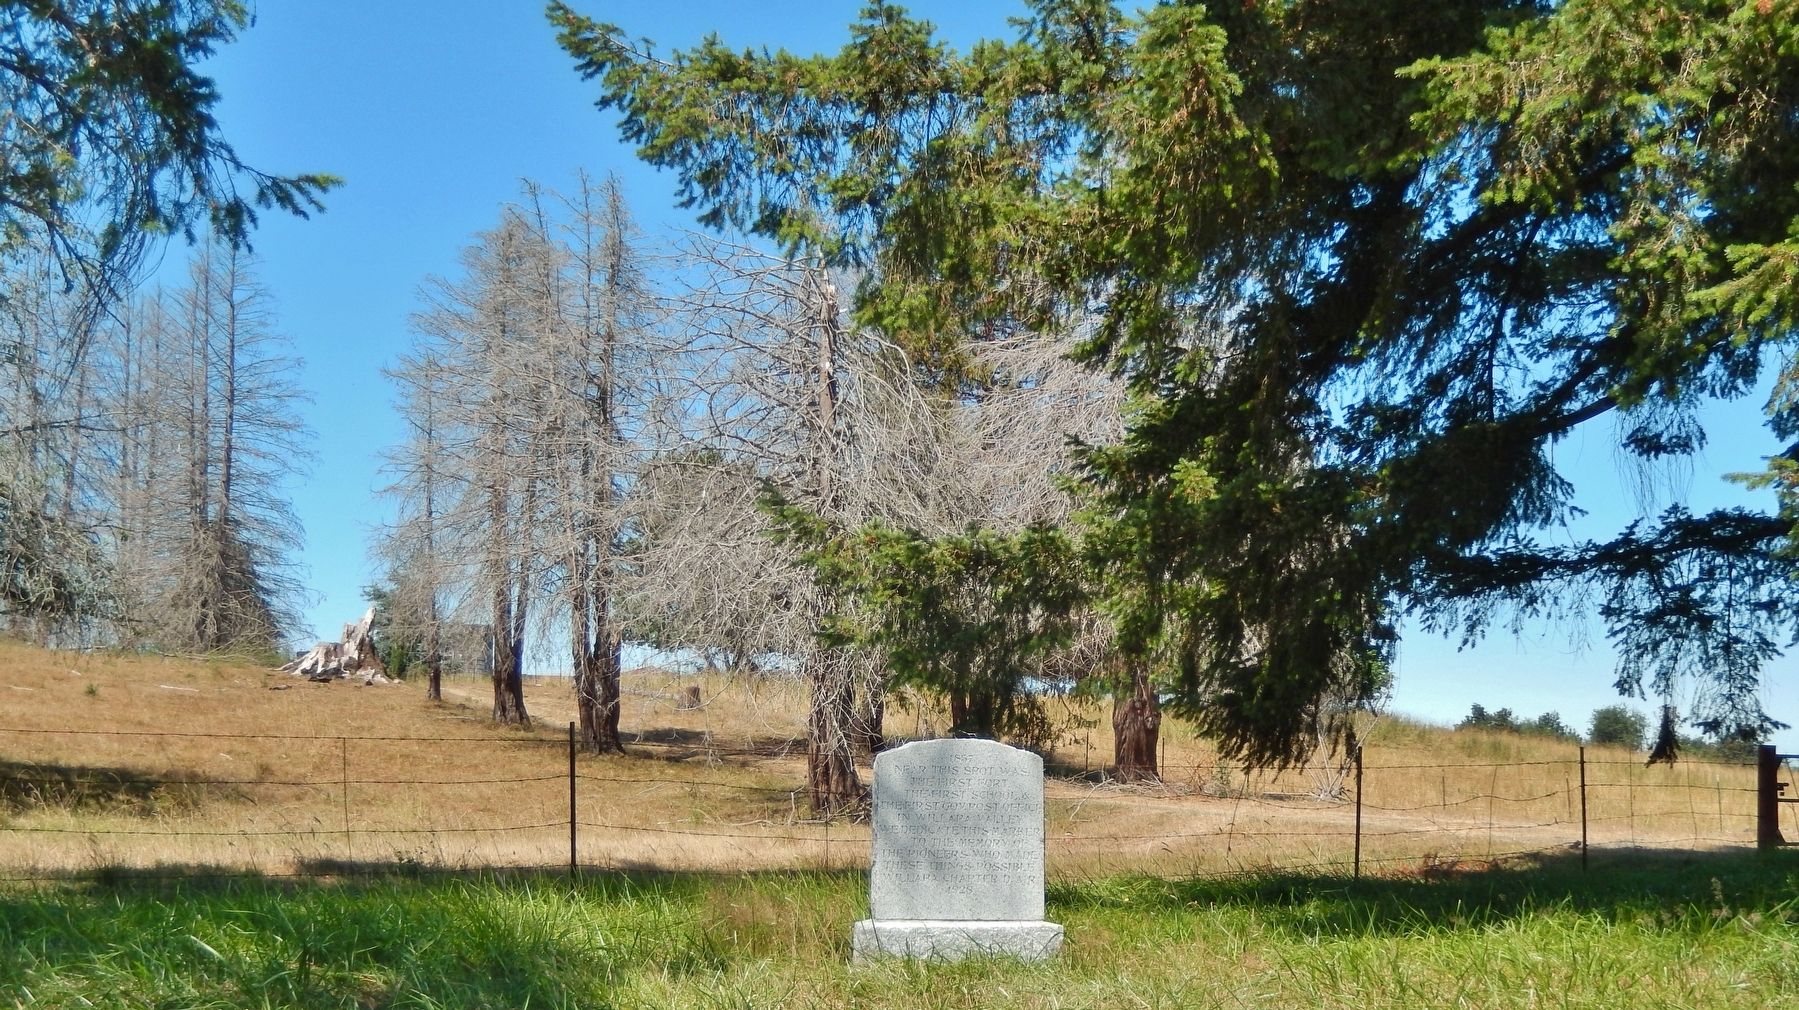 1857 Marker (<i>wide view</i>) image. Click for full size.